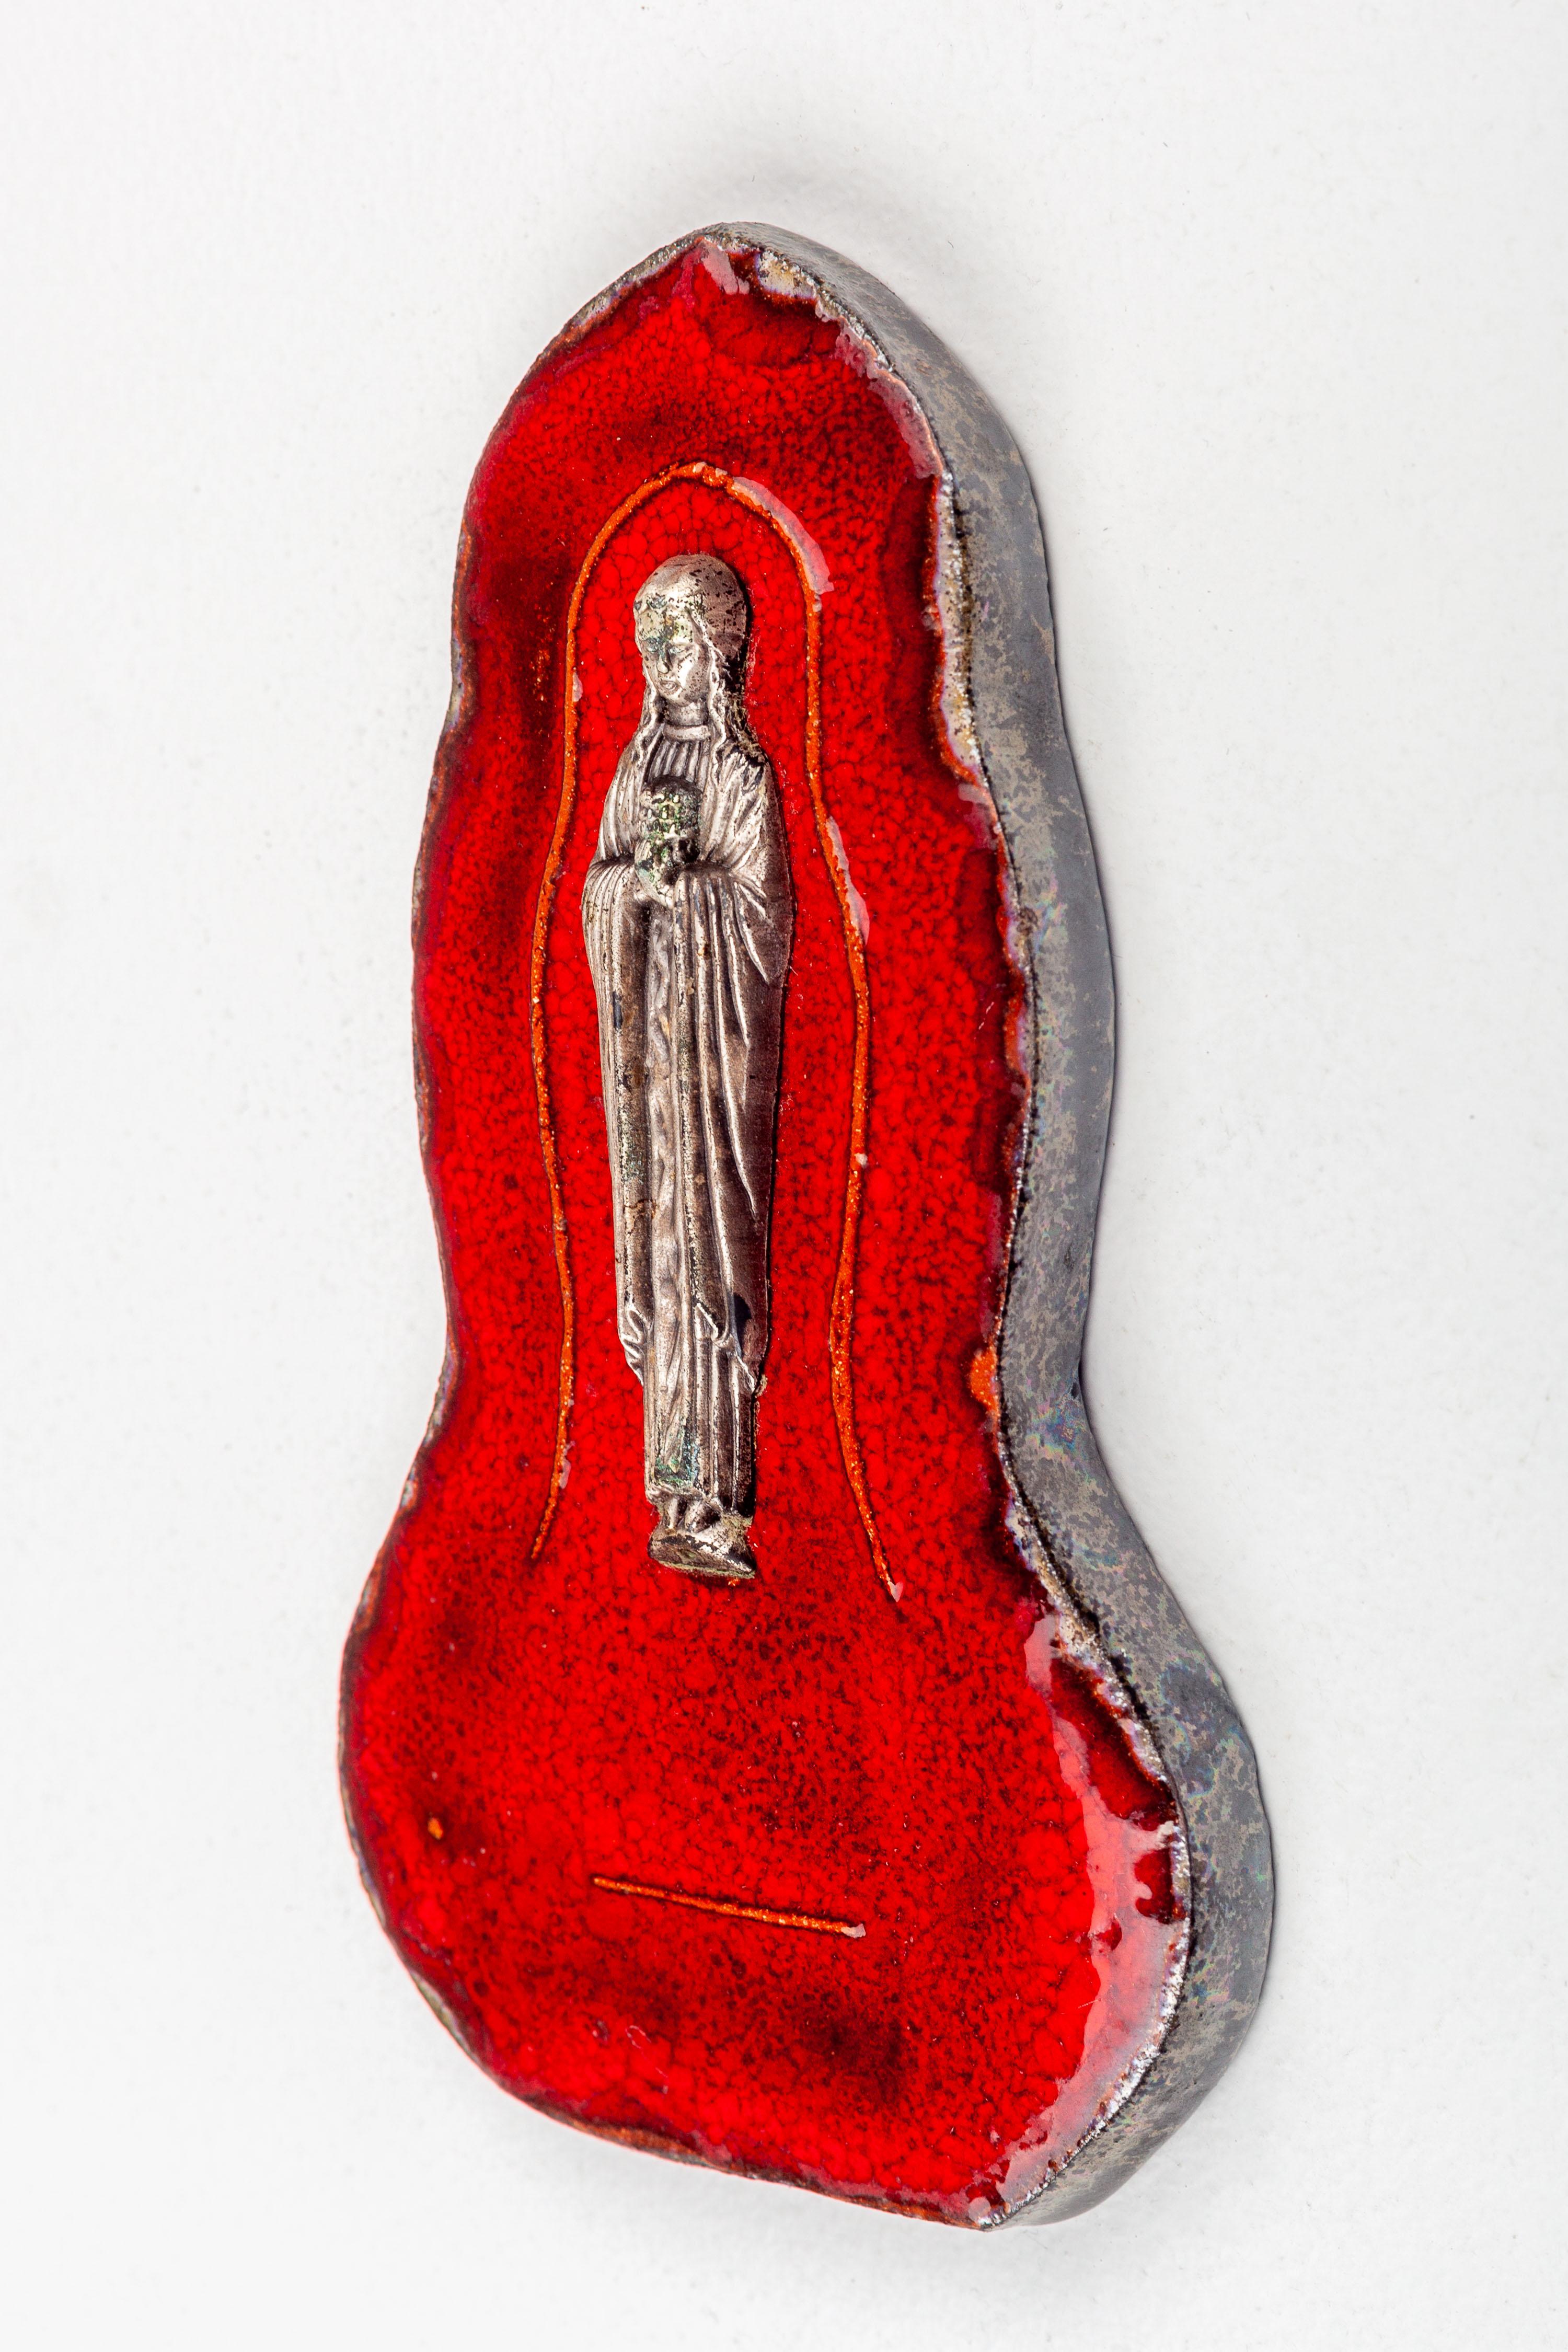 Midcentury Ceramic Wall Plaque with Metal Virgin Mary, European Studio Pottery In Good Condition For Sale In Chicago, IL